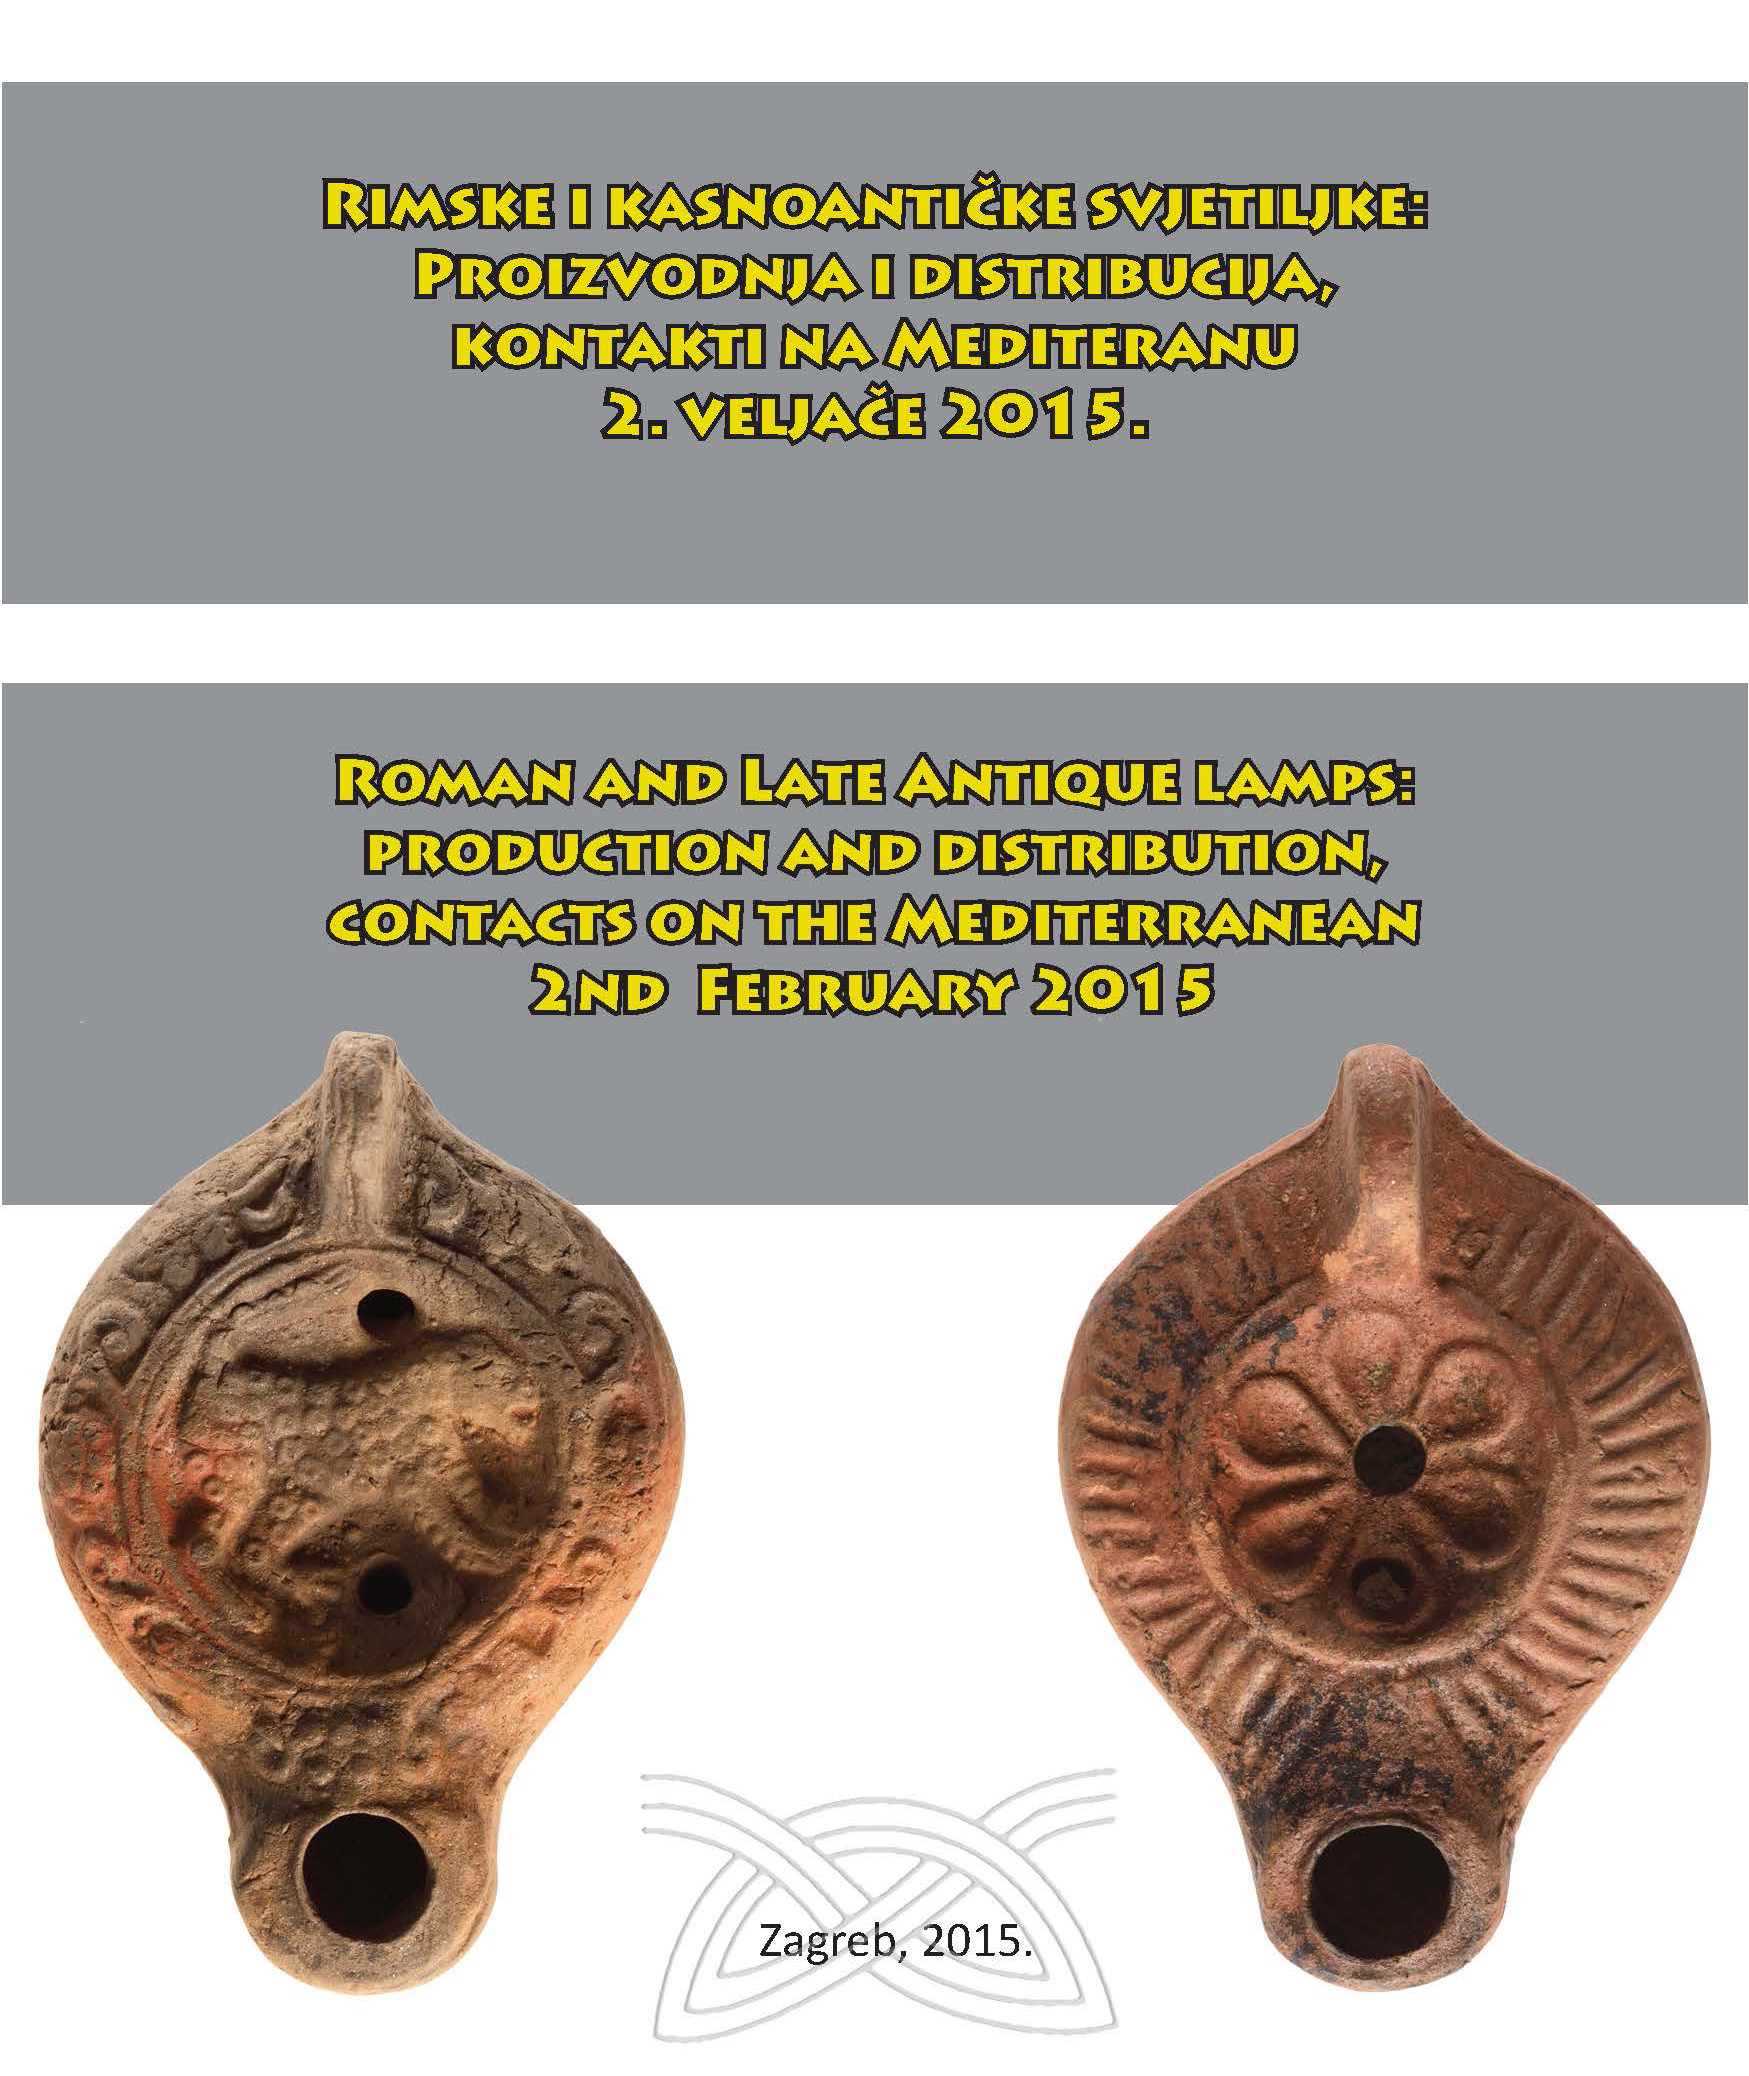 Roman and Late Roman Lamps: production and distribution, contacts on the Mediterranean